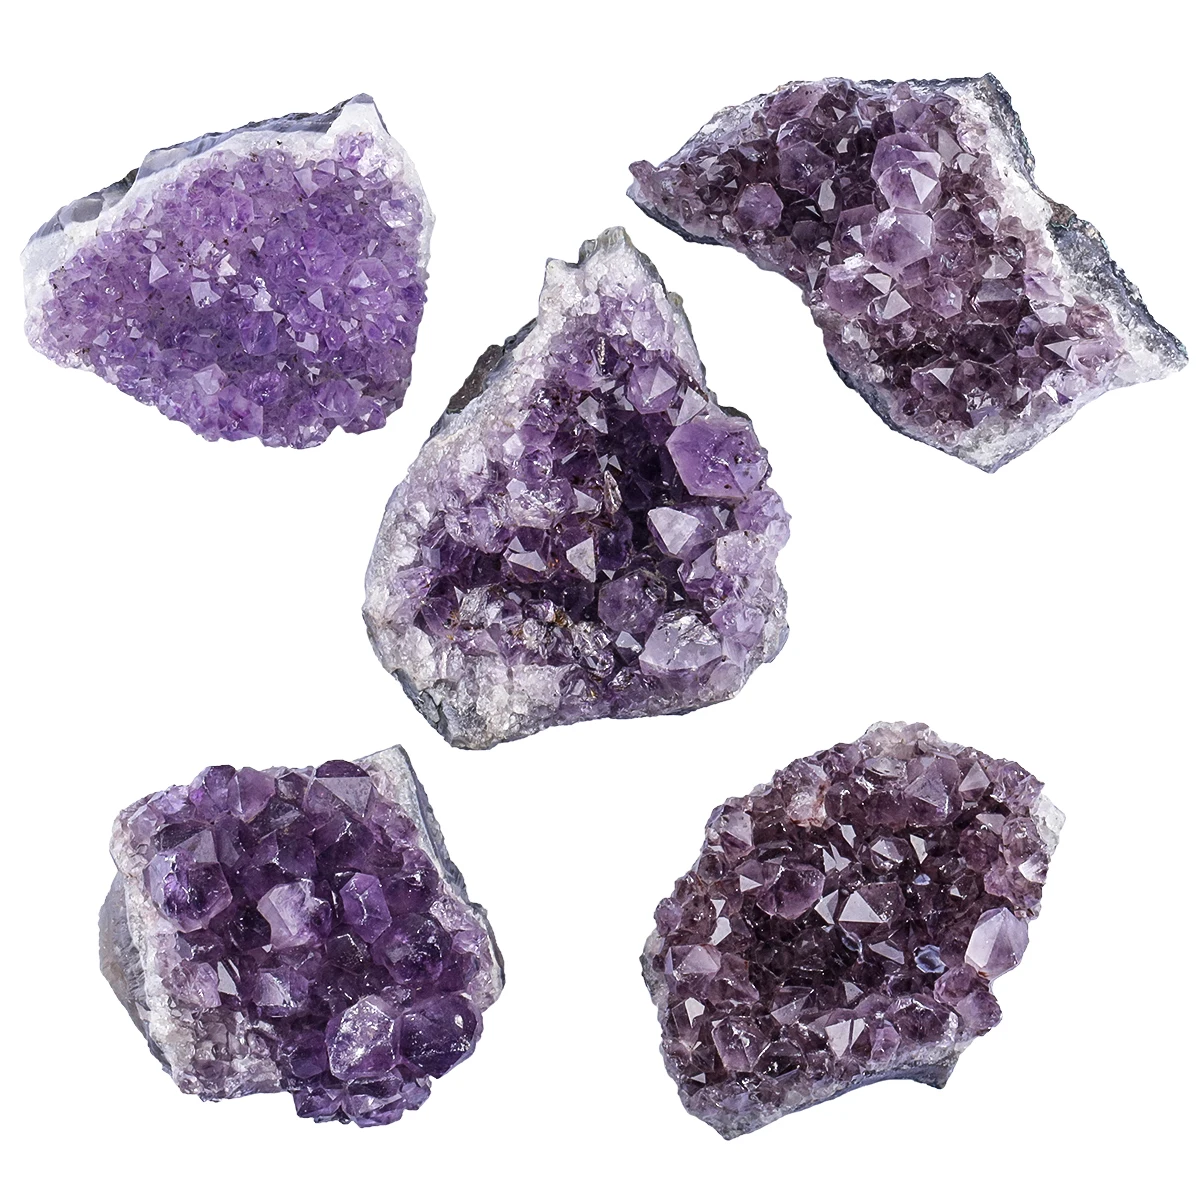 400g Natural Amethyst Cluster Healing Rough Gemstone Mineral Specimen Chakra Balancing For Home Decoration healing raw amethyst crystal calla lily with natural rose quartz base for desktop ornaments home decoration